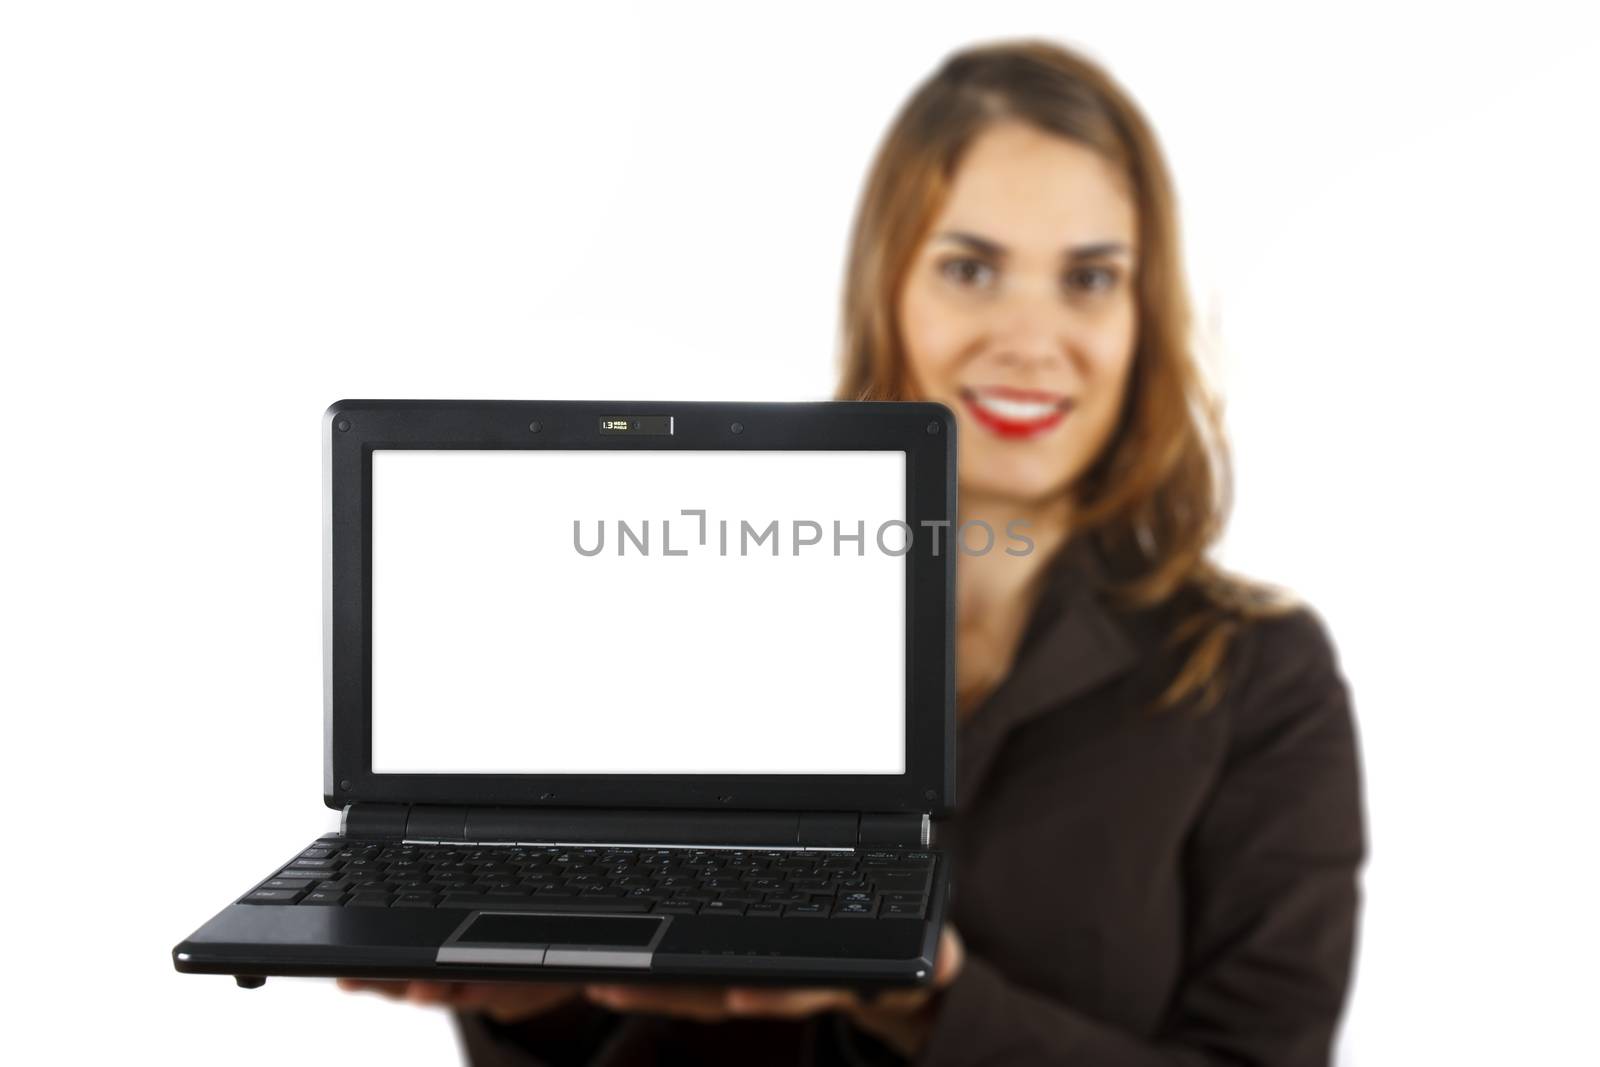 Businesswoman out of focus at background showing a laptop with white display. Isolated on white background.